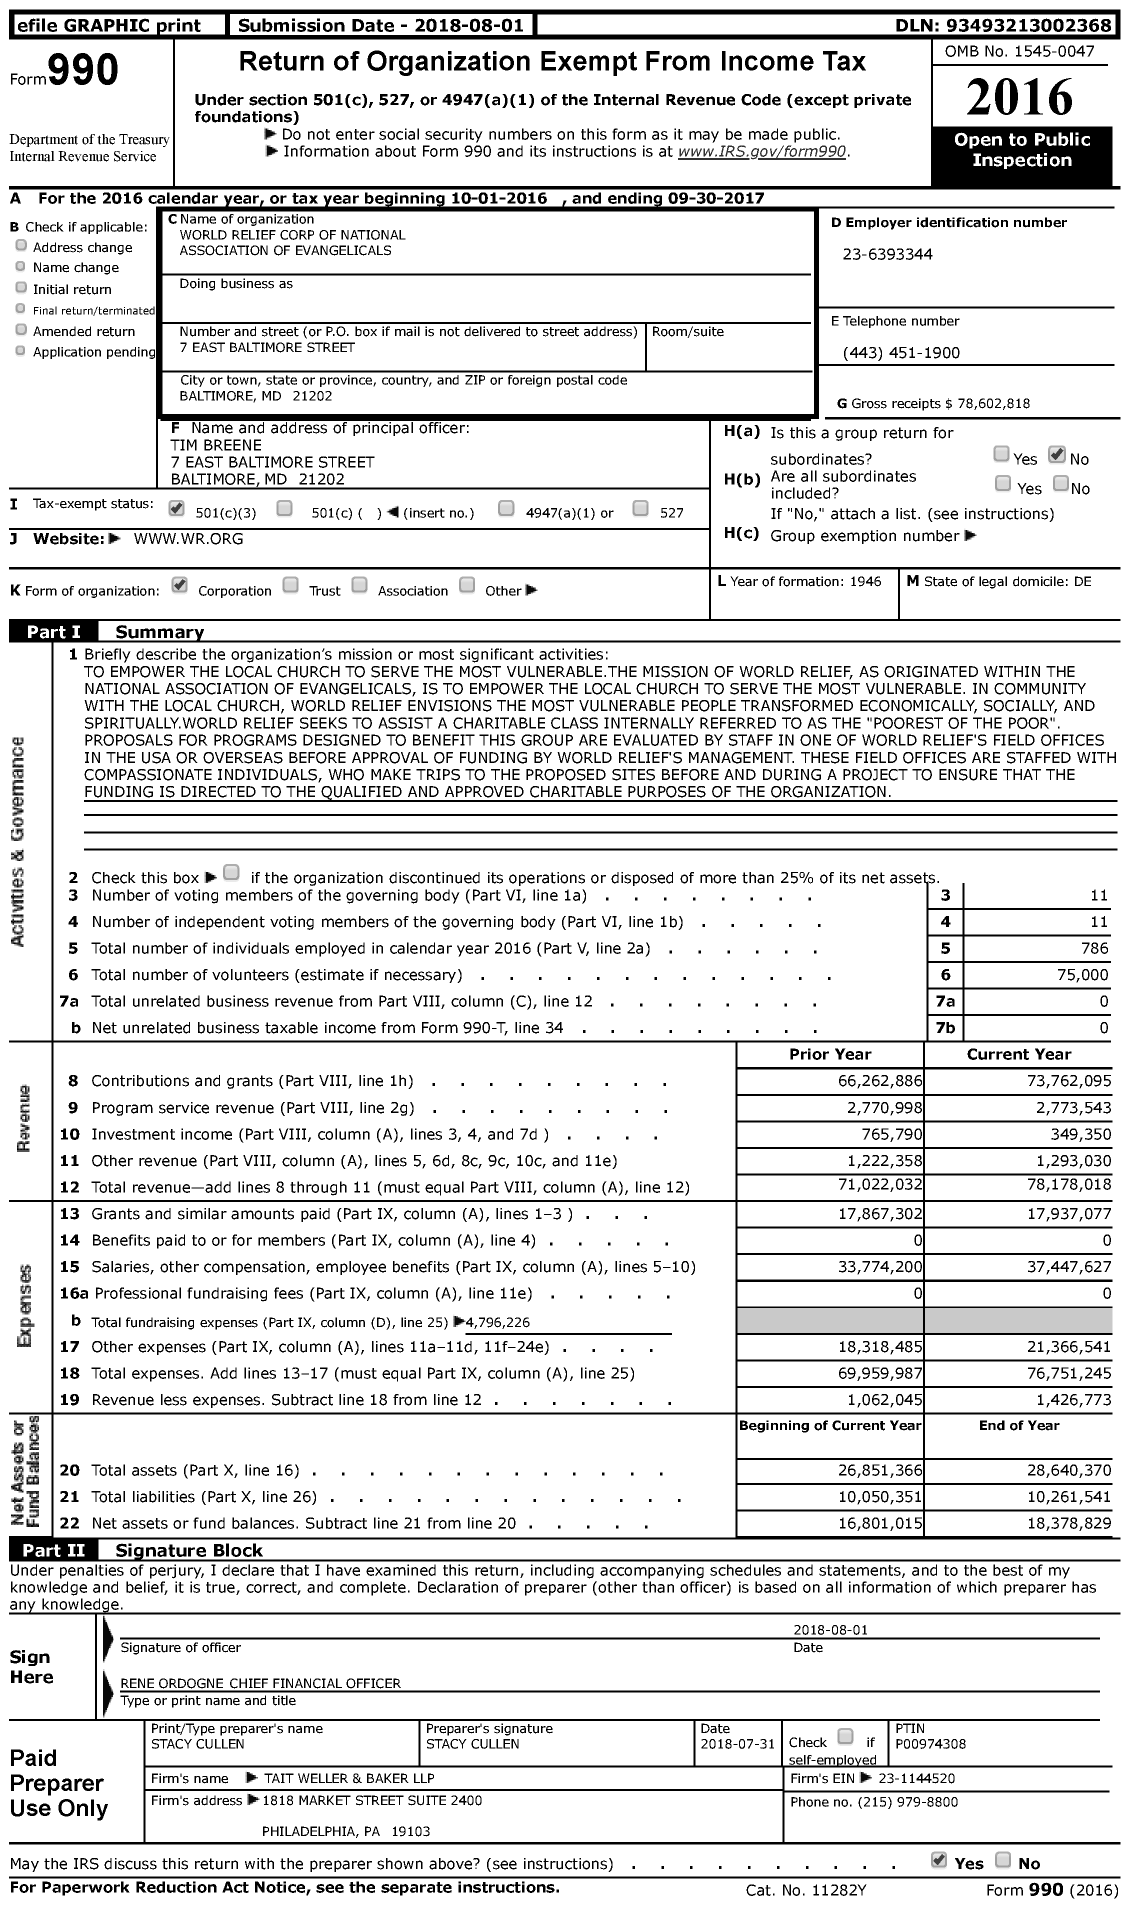 Image of first page of 2016 Form 990 for World Relief Corp of National Association of Evangelicals